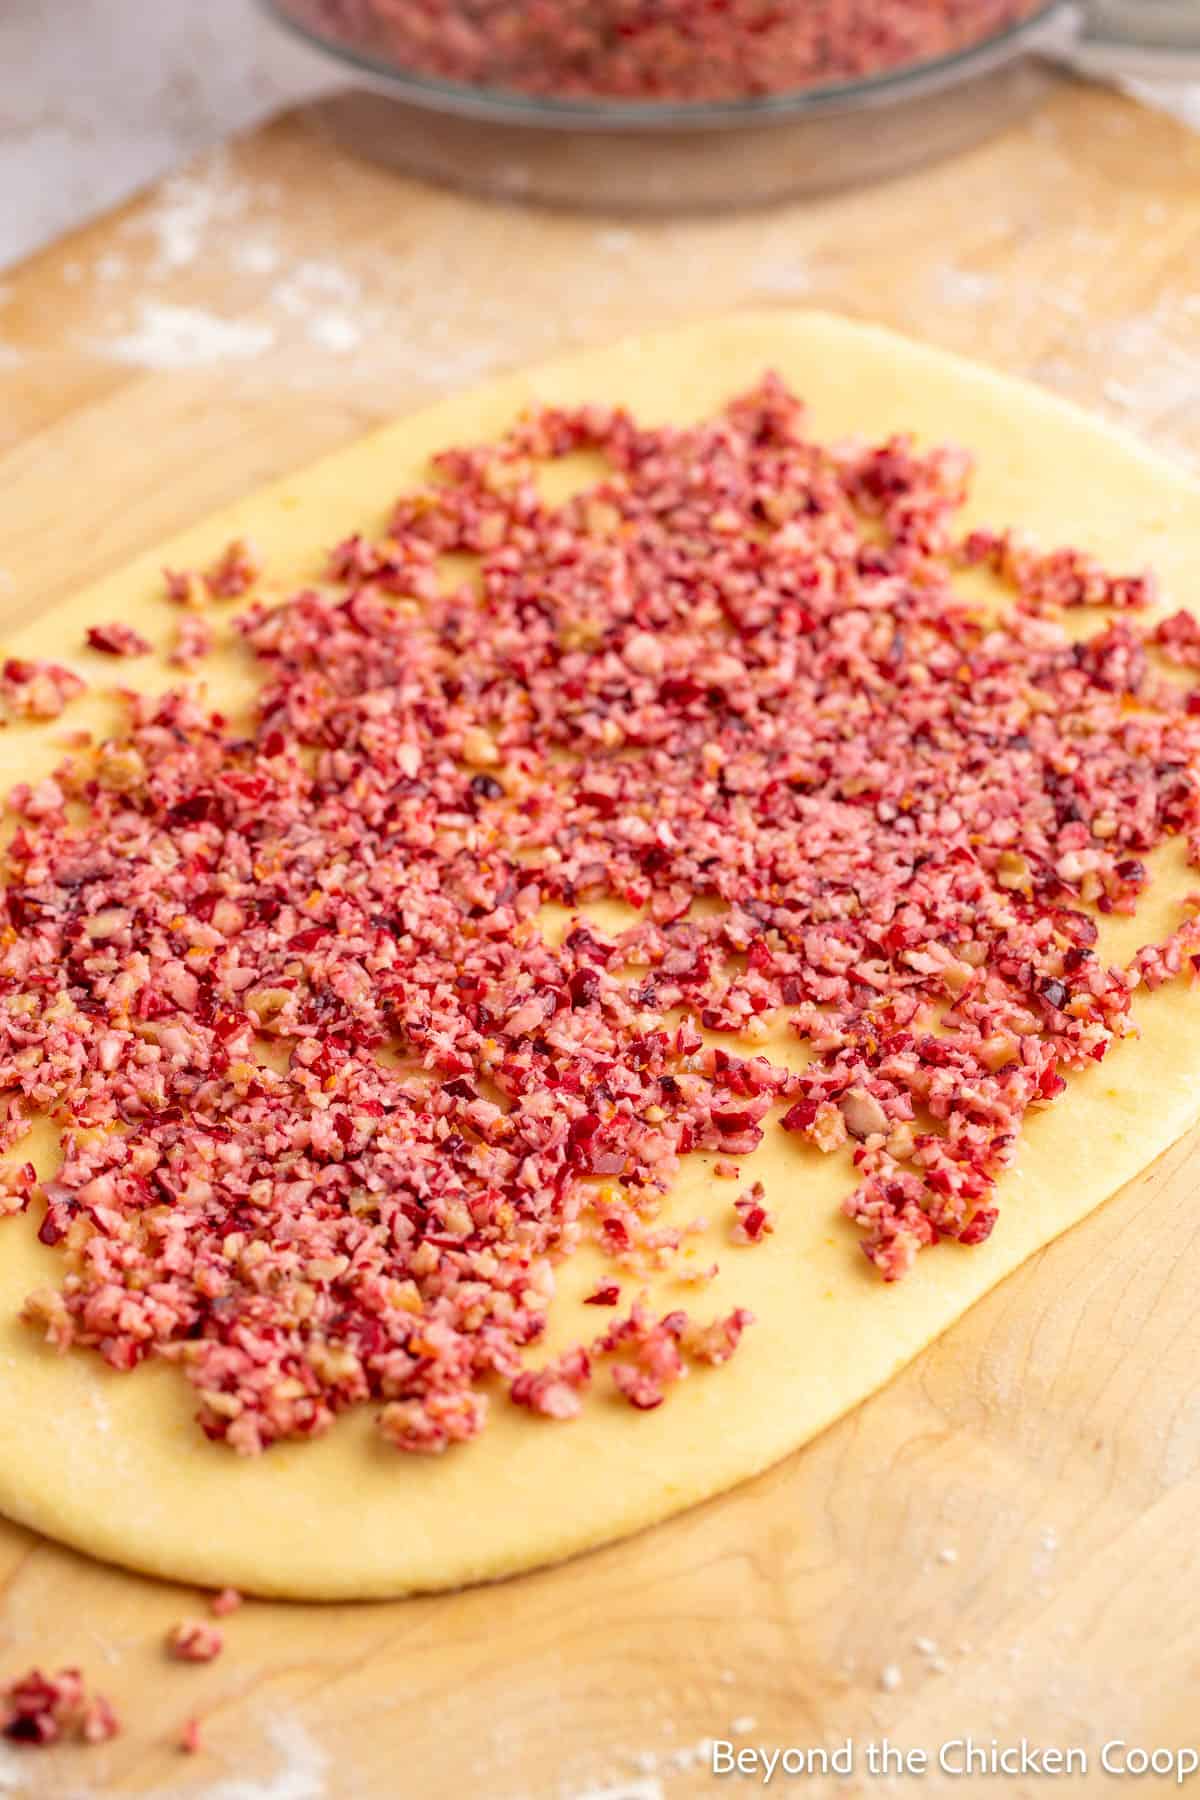 Chopped cranberries on rolled out dough. 